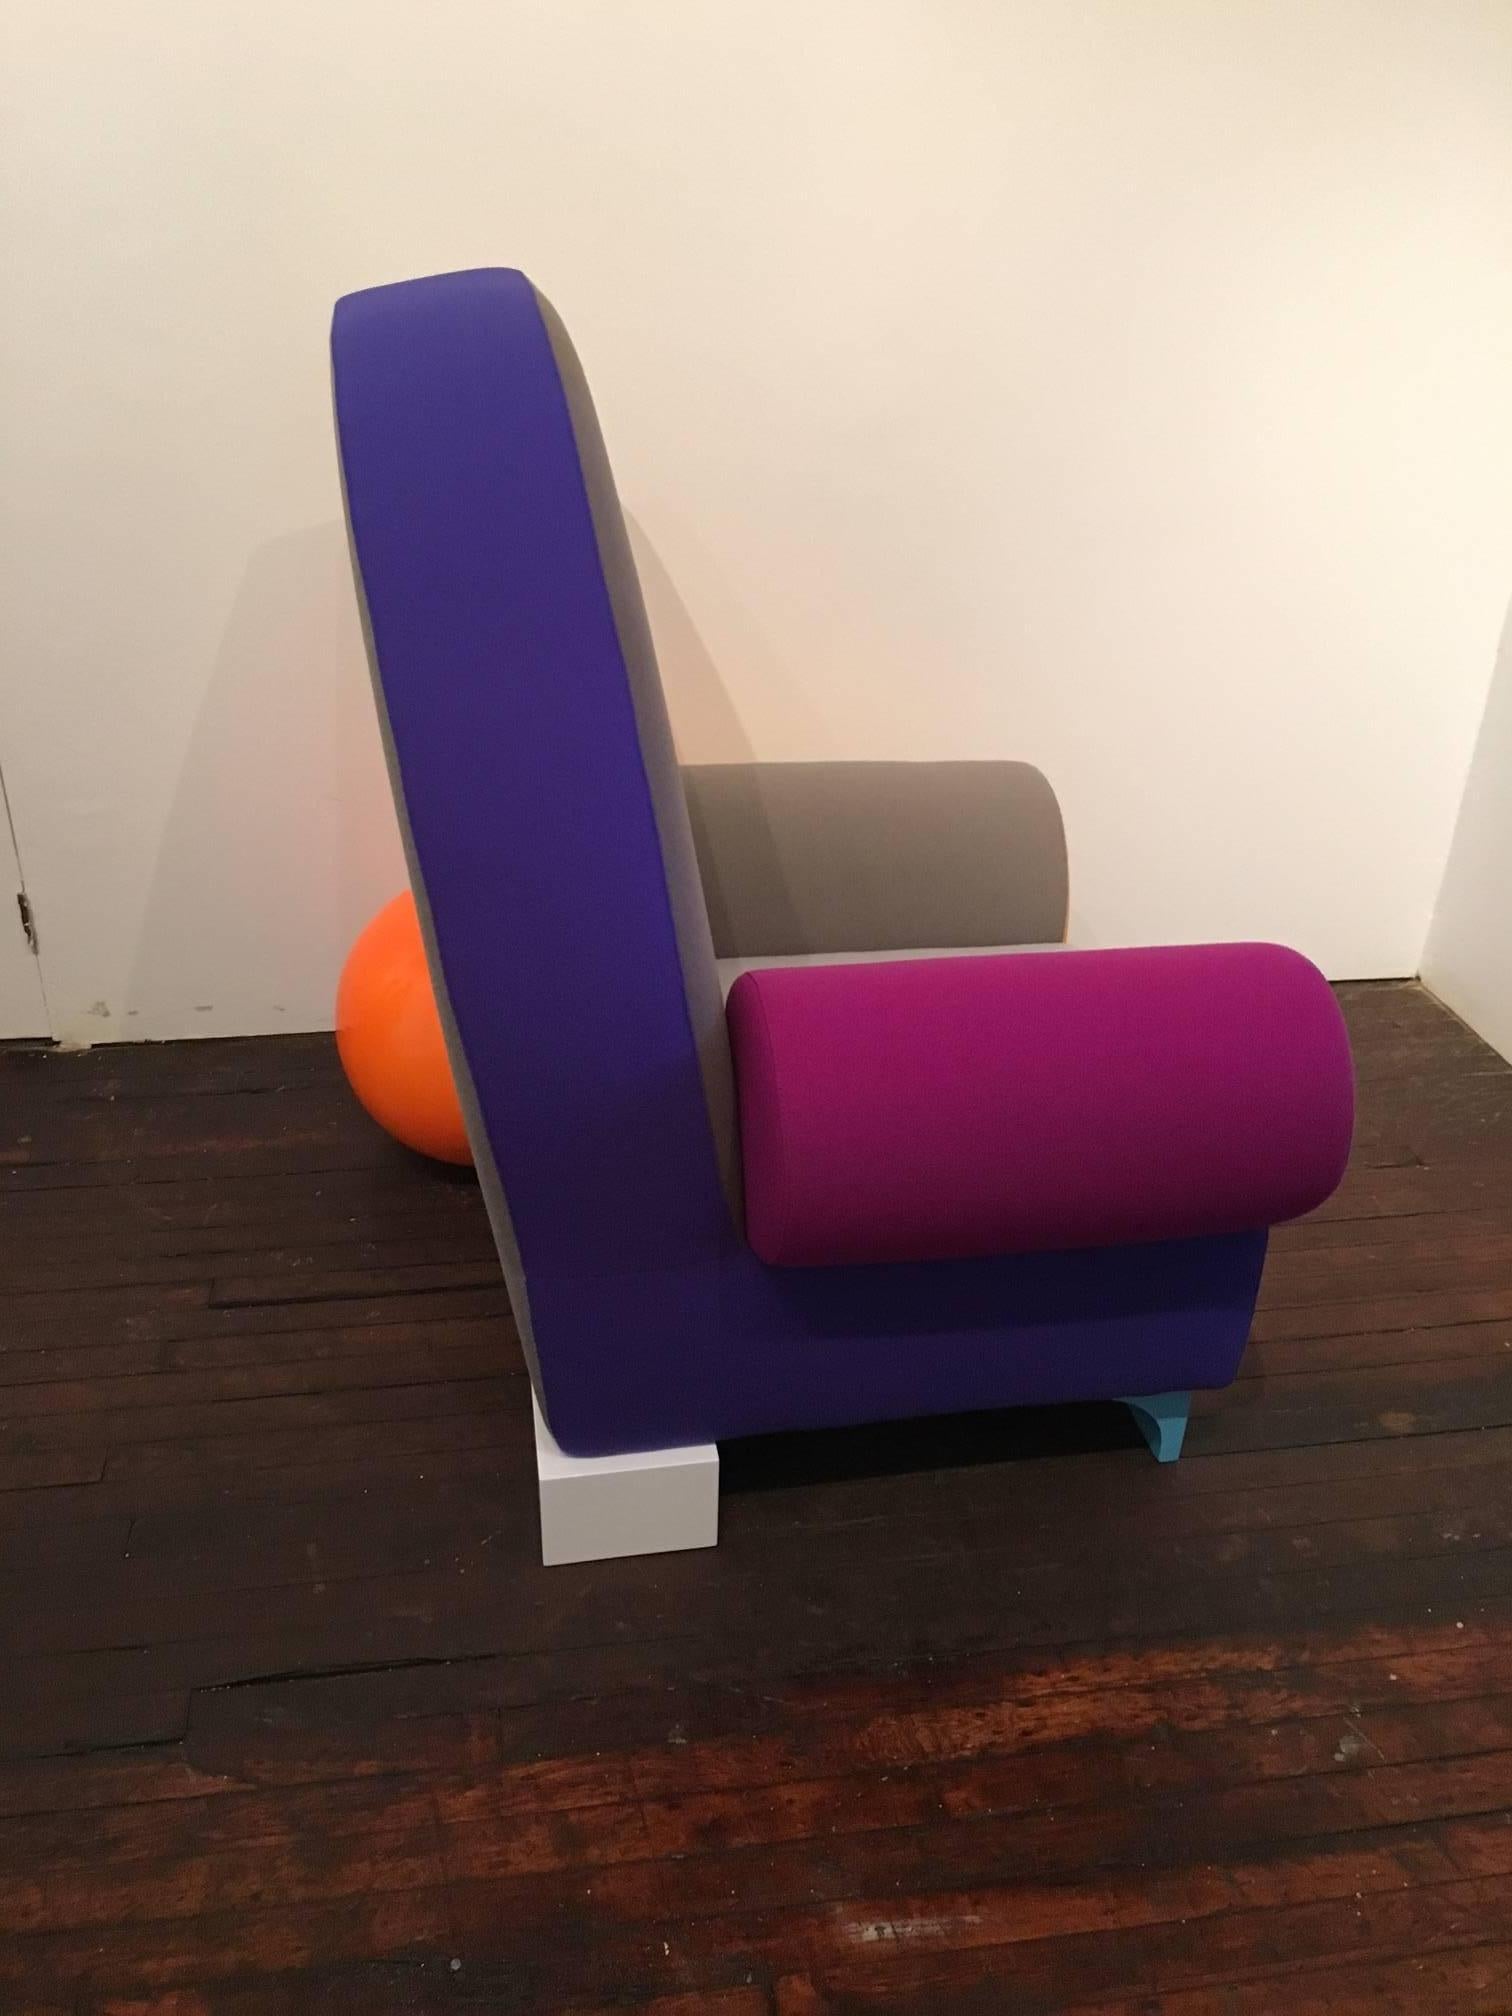 Post-Modern Bel Air Armchair by Peter Shire